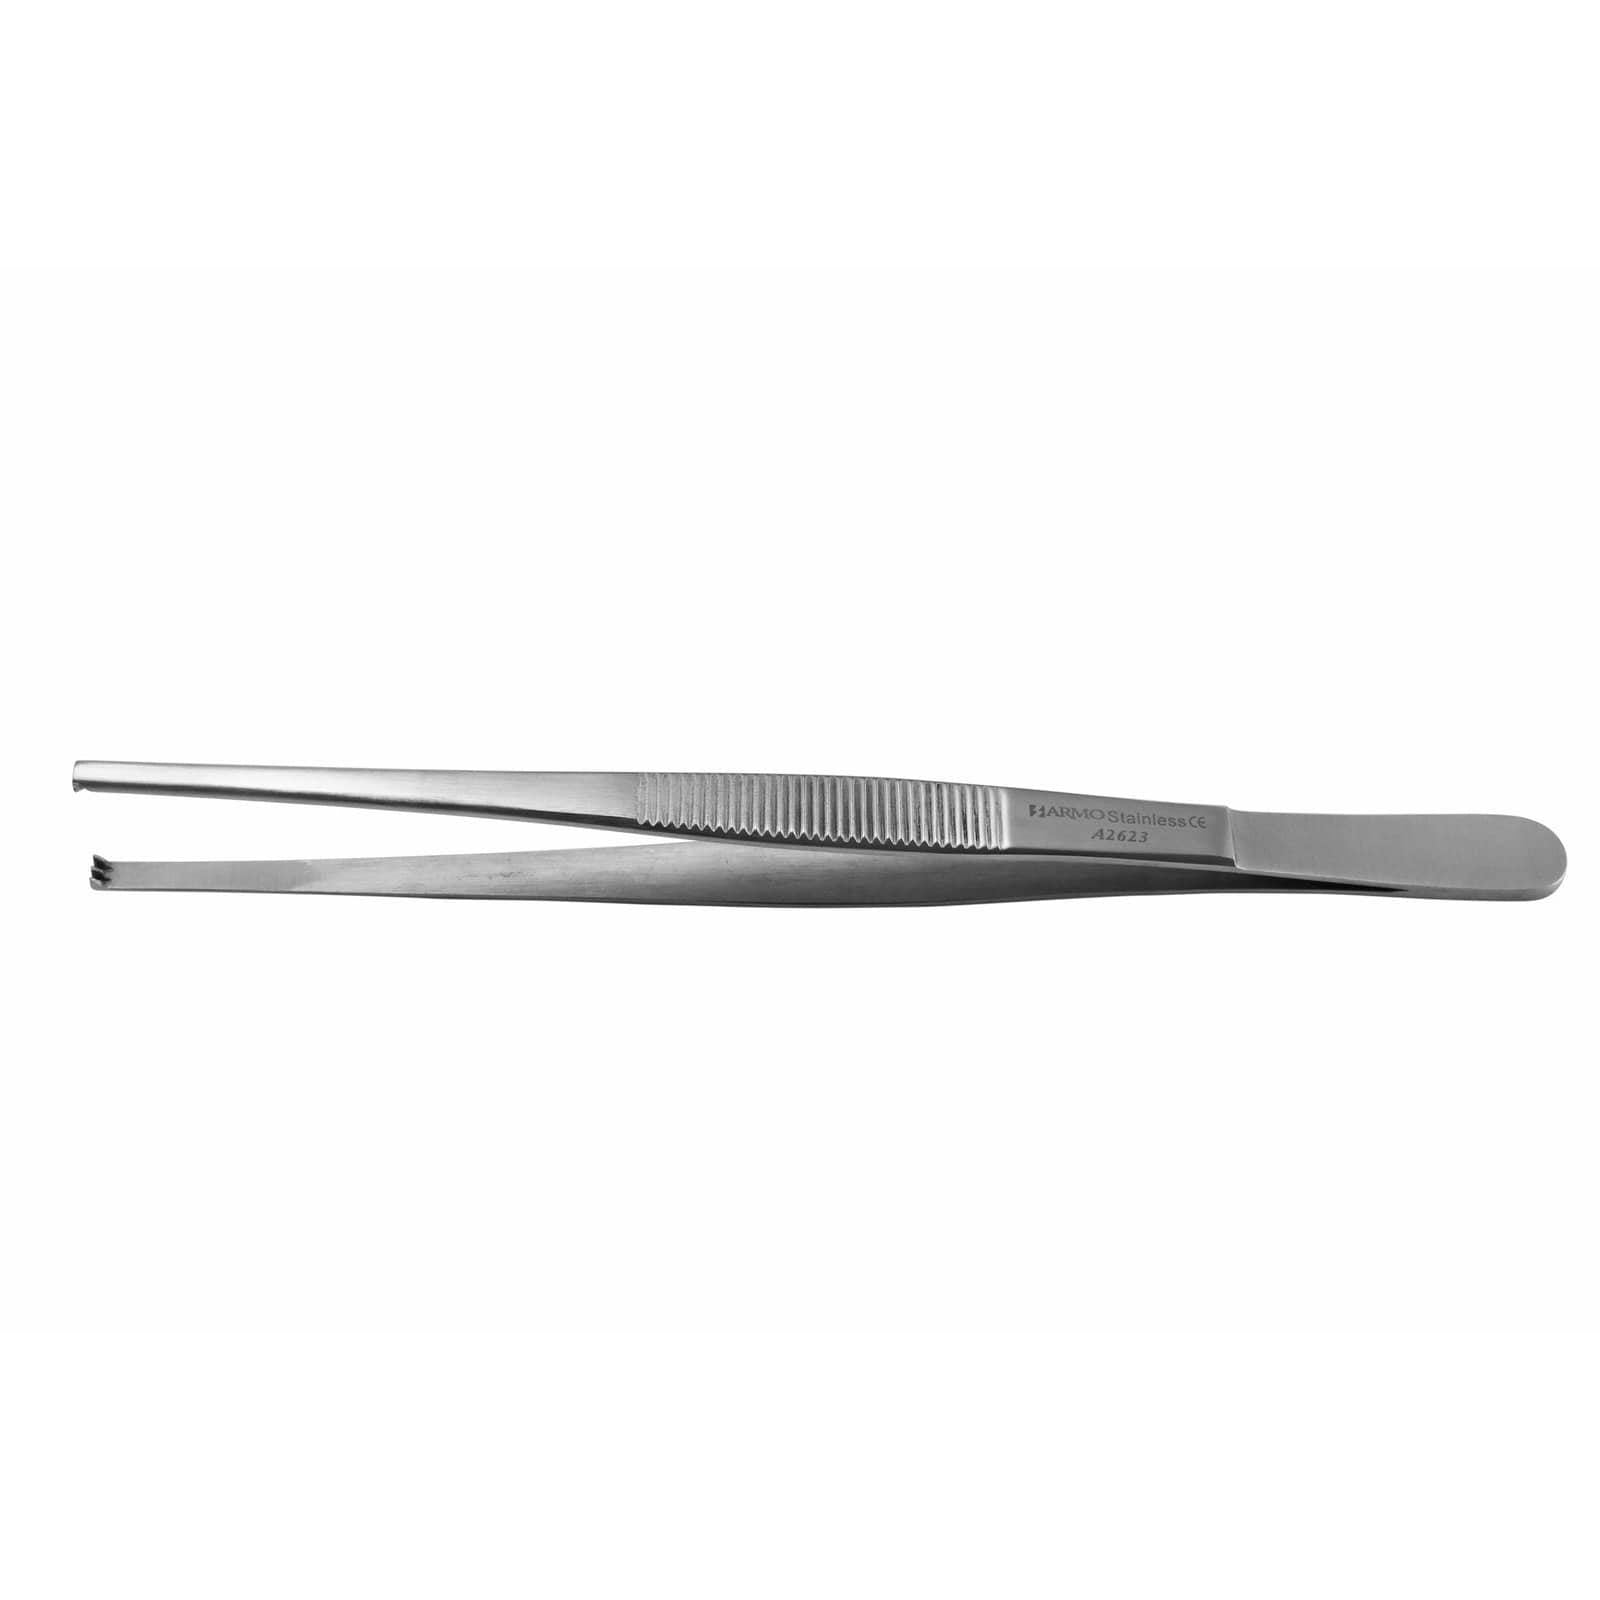 Armo Surgical Instruments 16cm / 2x3 Teeth Armo Tissue Forcep